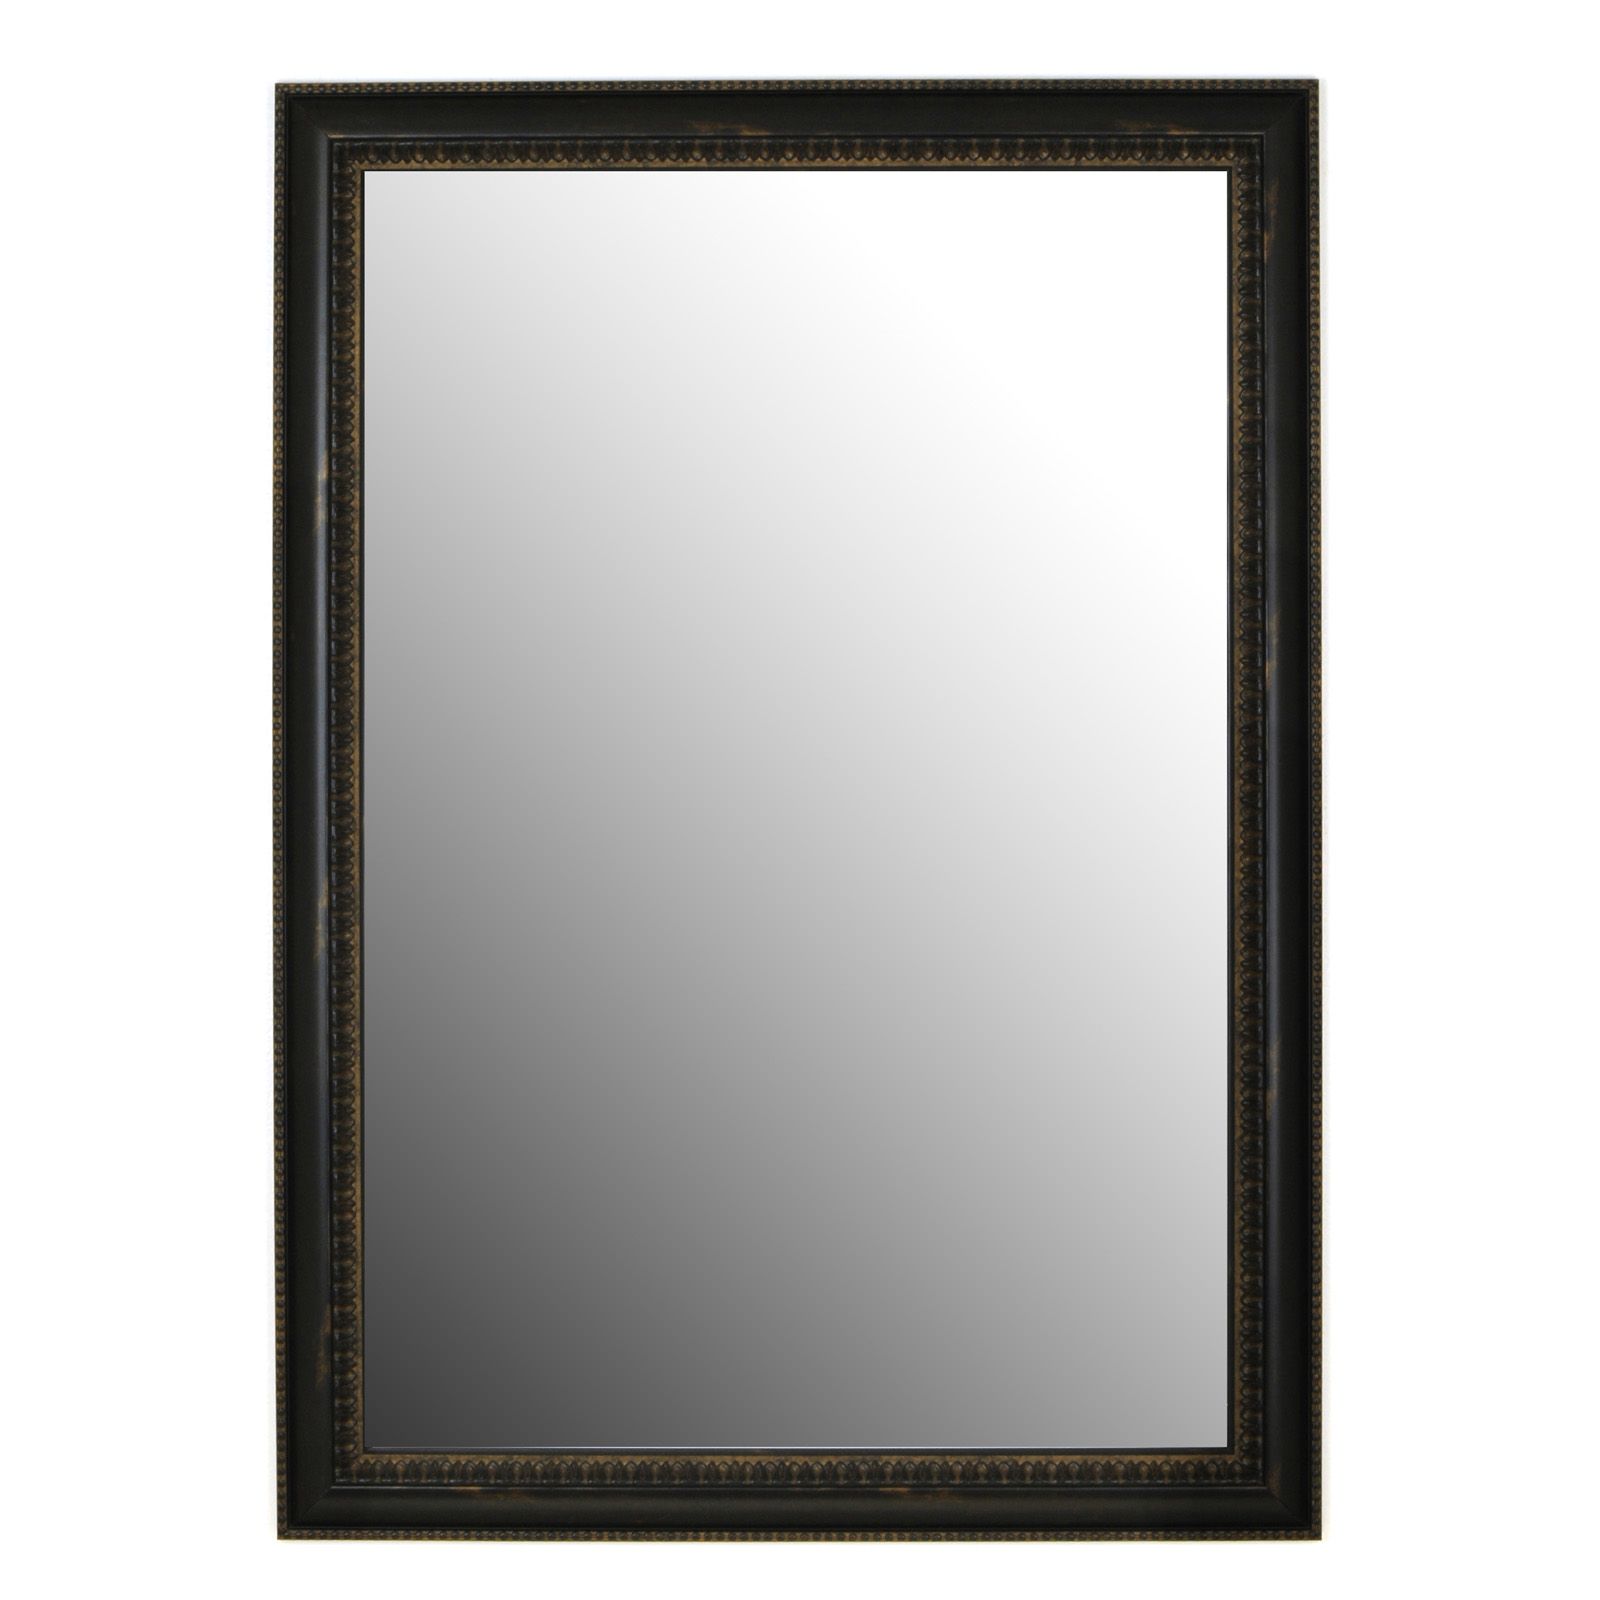 Fashionable Second Look Mirrors Beaded Copper Black Petite Wall Mirror – Mirrors At Pertaining To Black Beaded Rectangular Wall Mirrors (View 8 of 15)